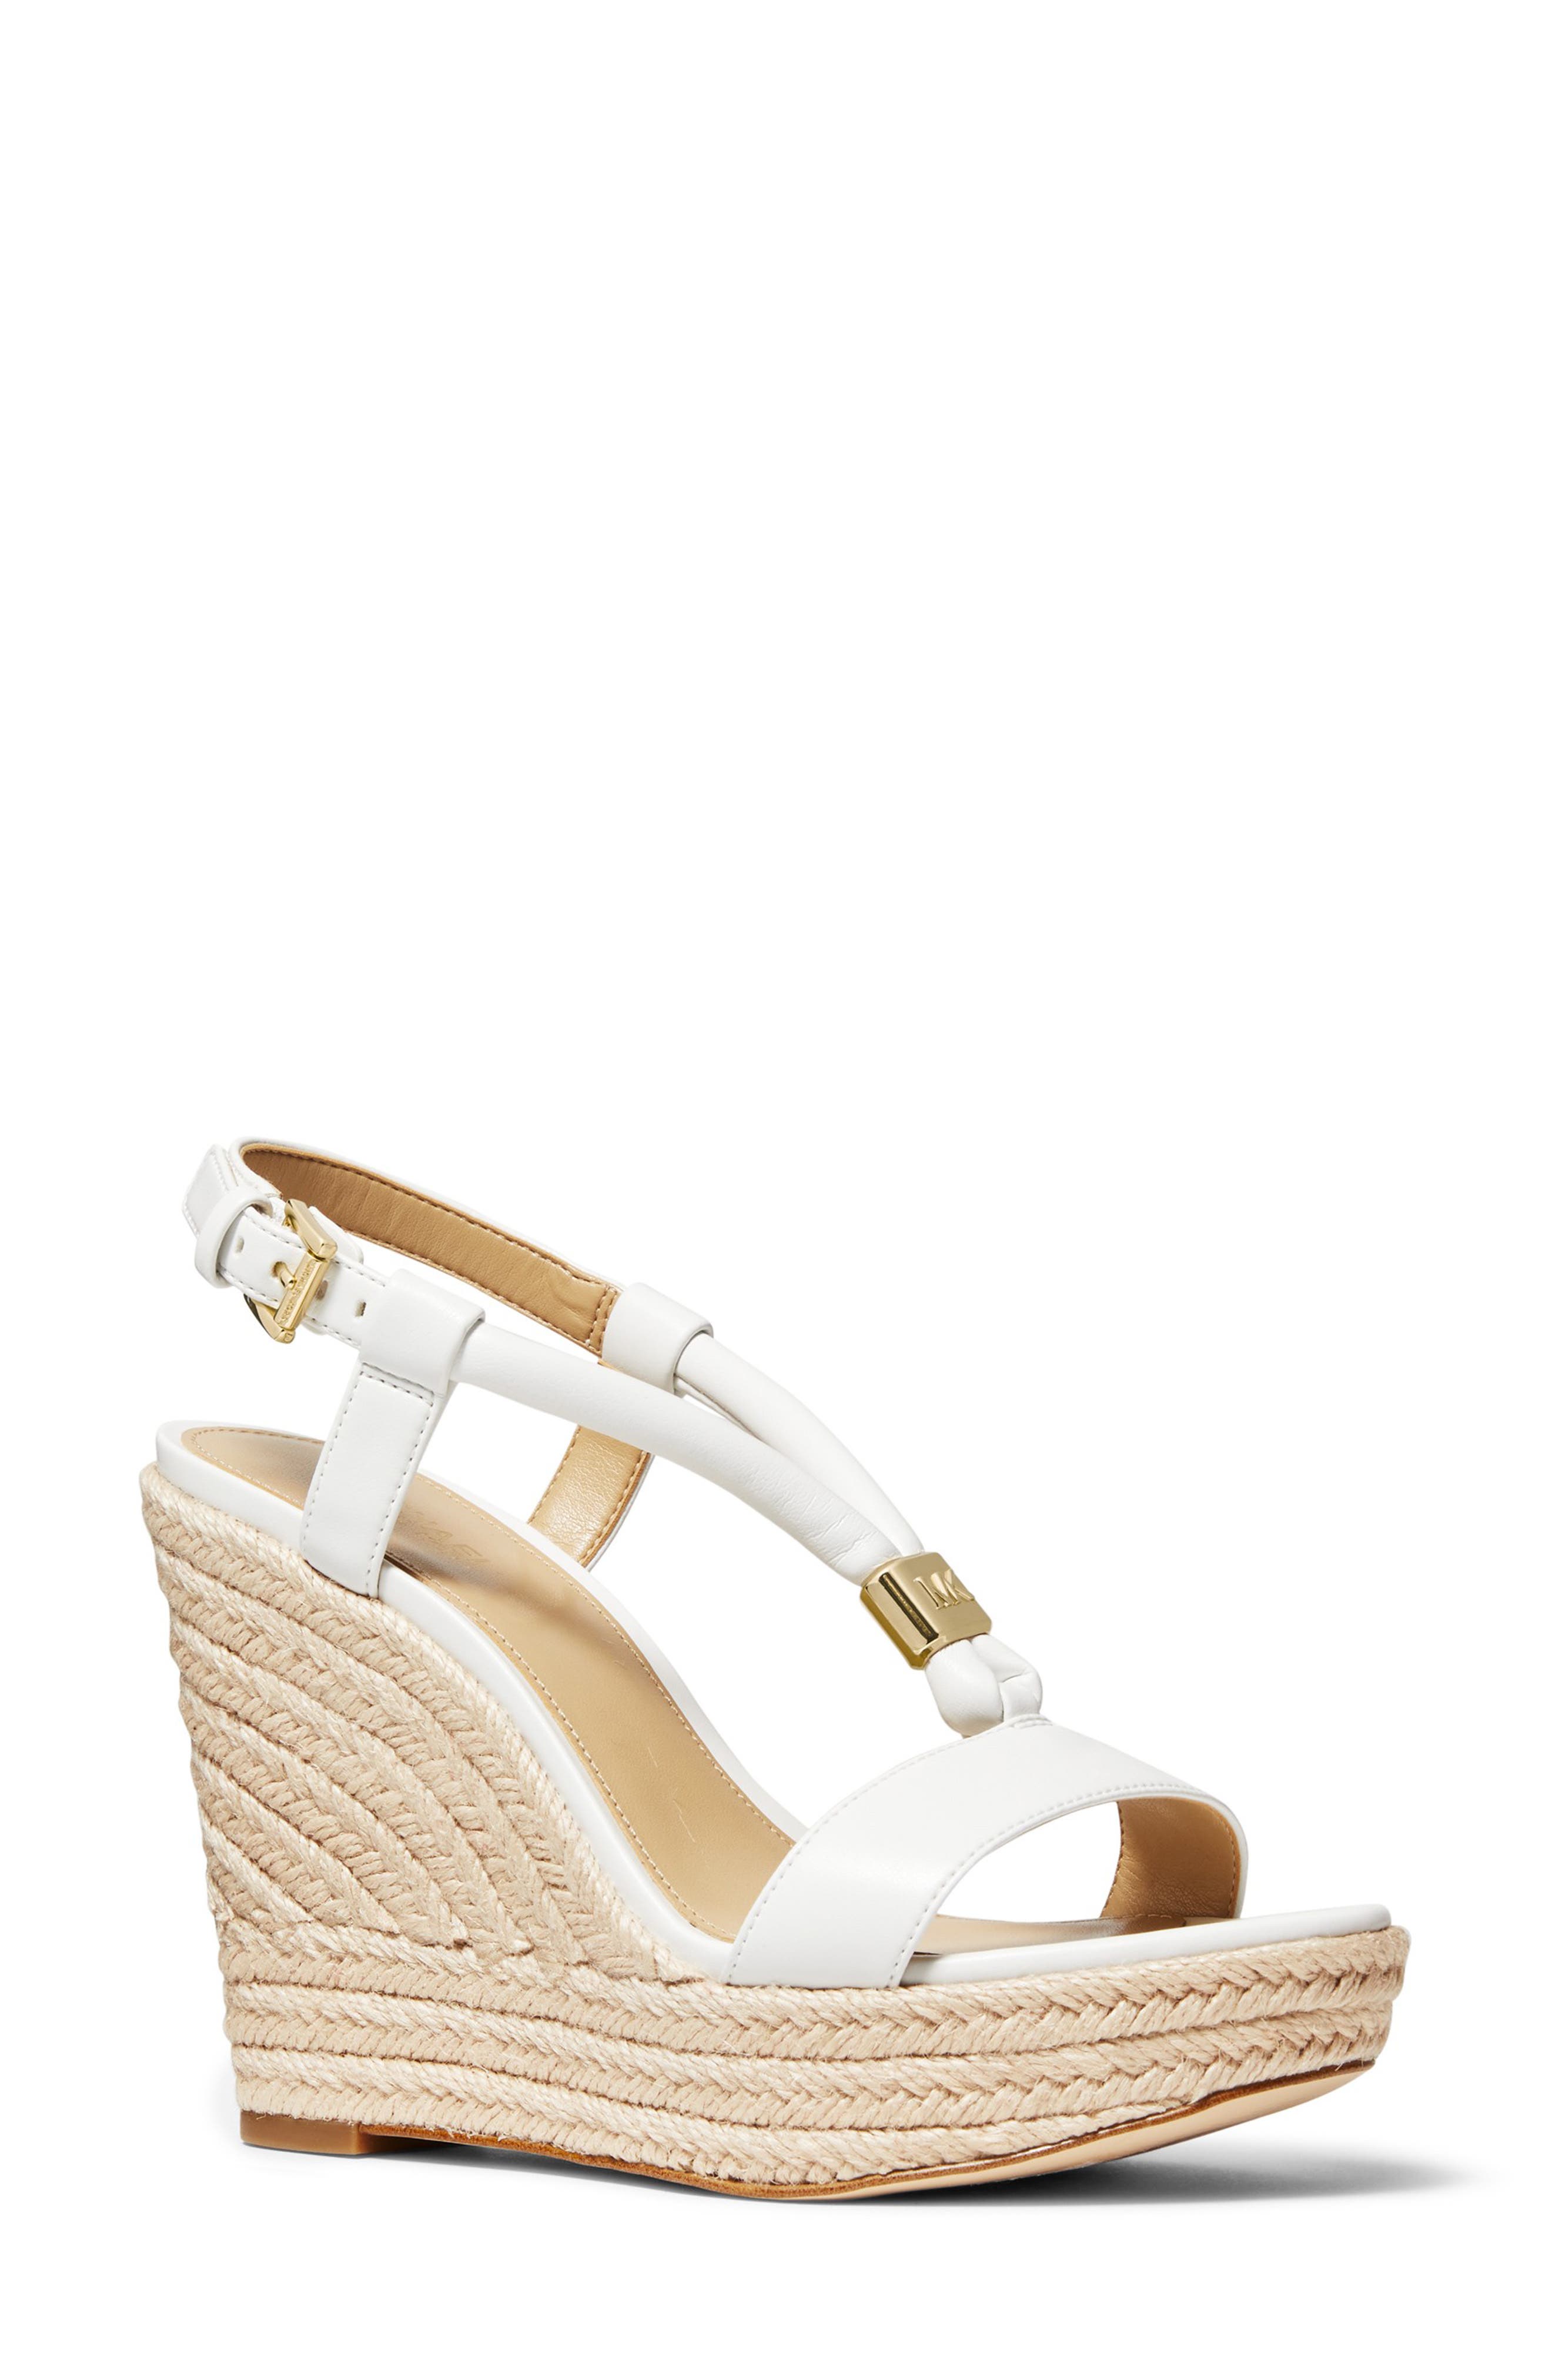 Llivia Wedge Sandal in White Leather at Nordstrom Nordstrom Women Shoes High Heels Wedges Wedge Sandals 